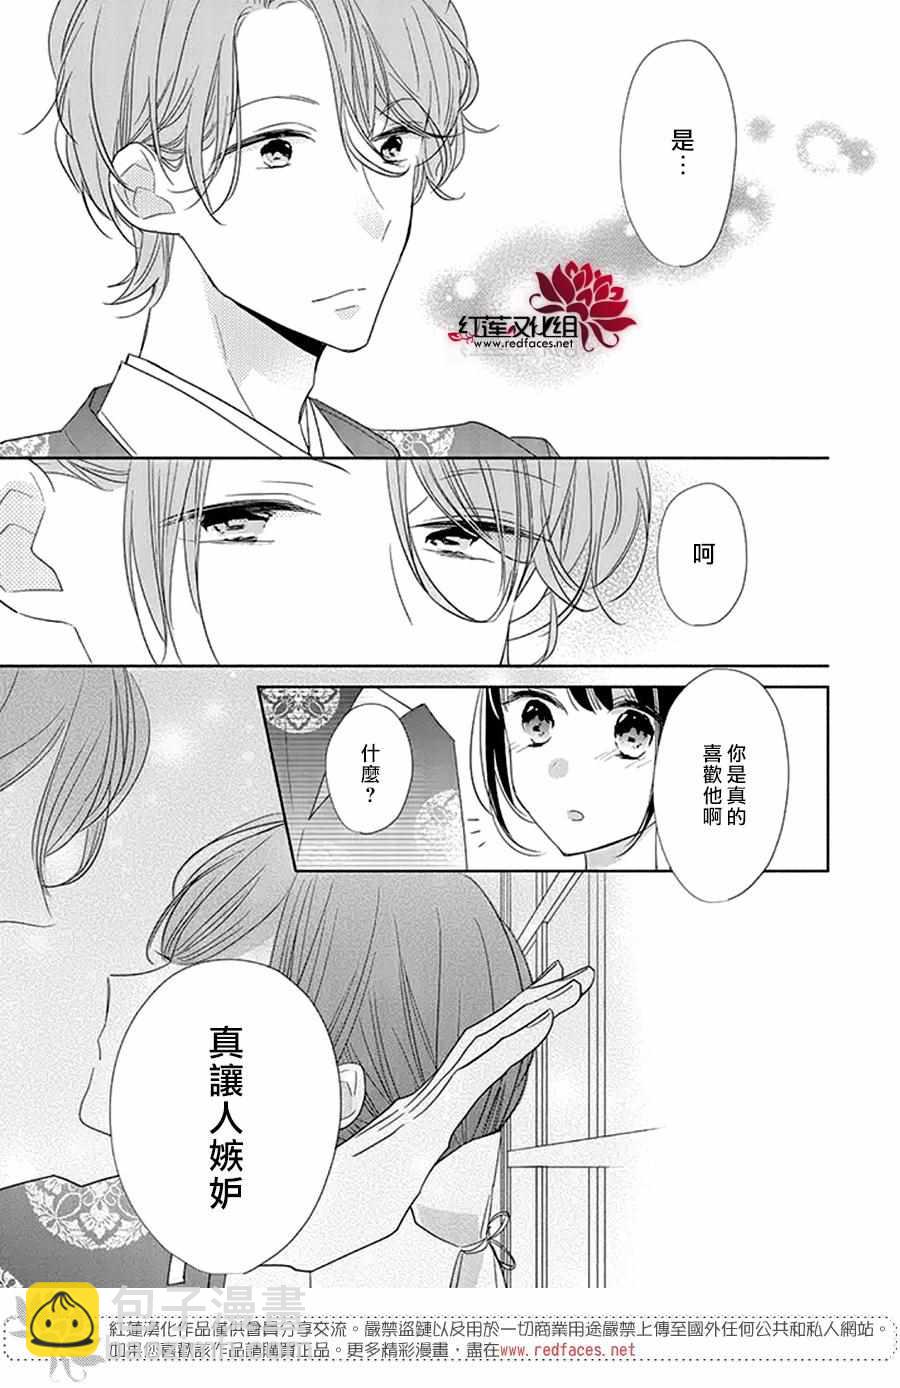 If given a second chance - 22話 - 5